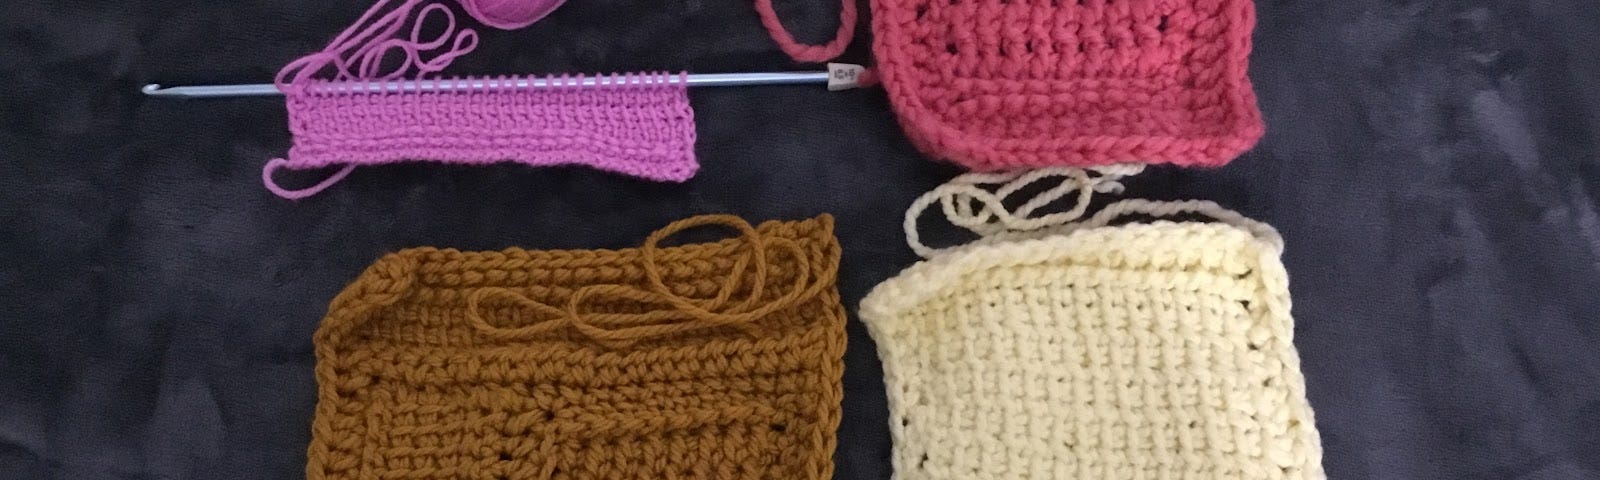 Three squares worked in different Tunisan crochet stitches and one in progress.